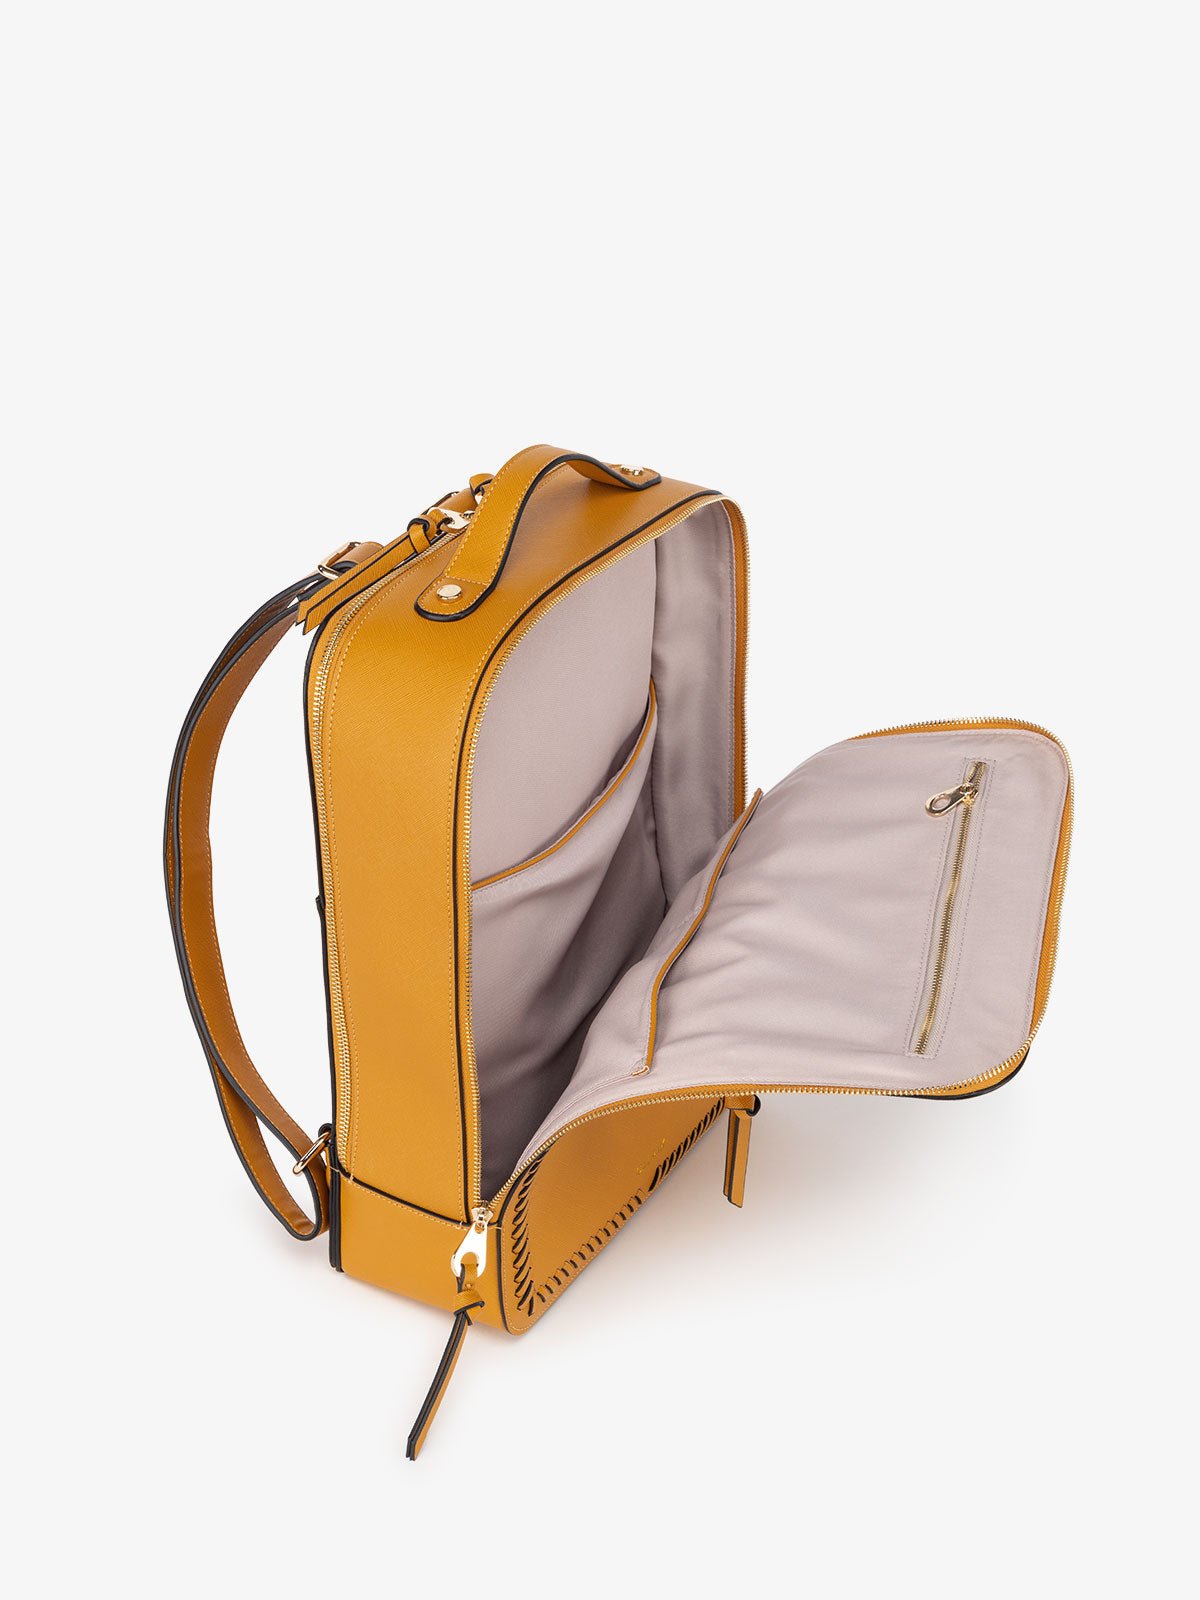 CALPAK Kaya backpack with laptop compartment in honey